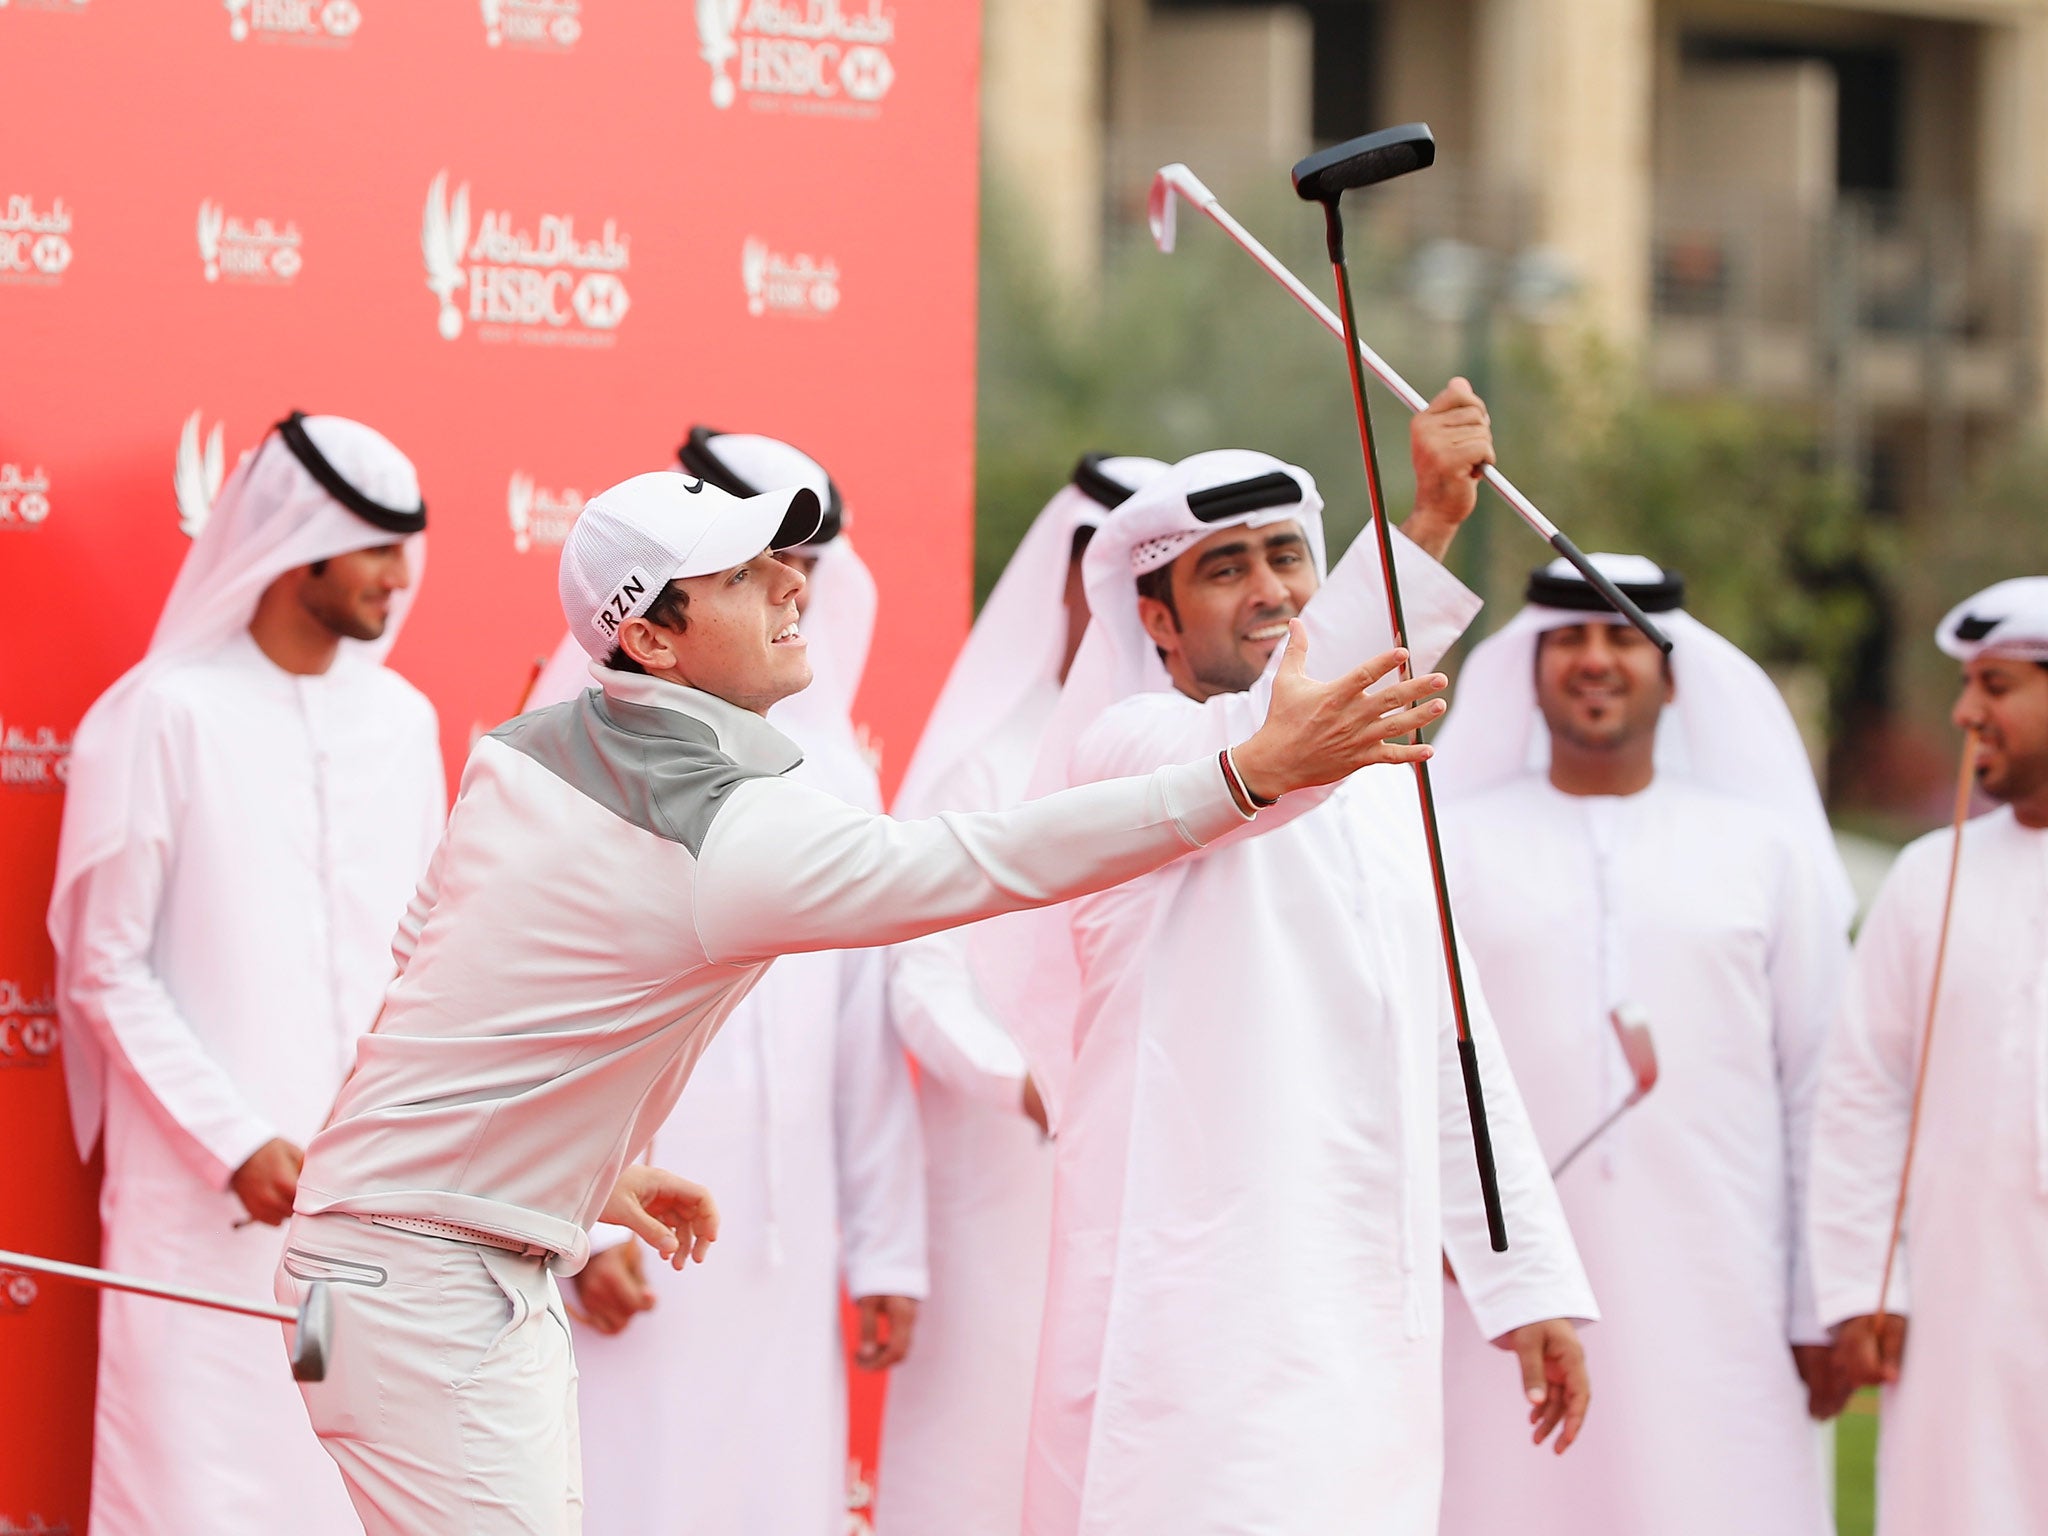 Rory McIlroy takes part in a PR stunt ahead of the Abu Dhabi HSBC Golf Championship